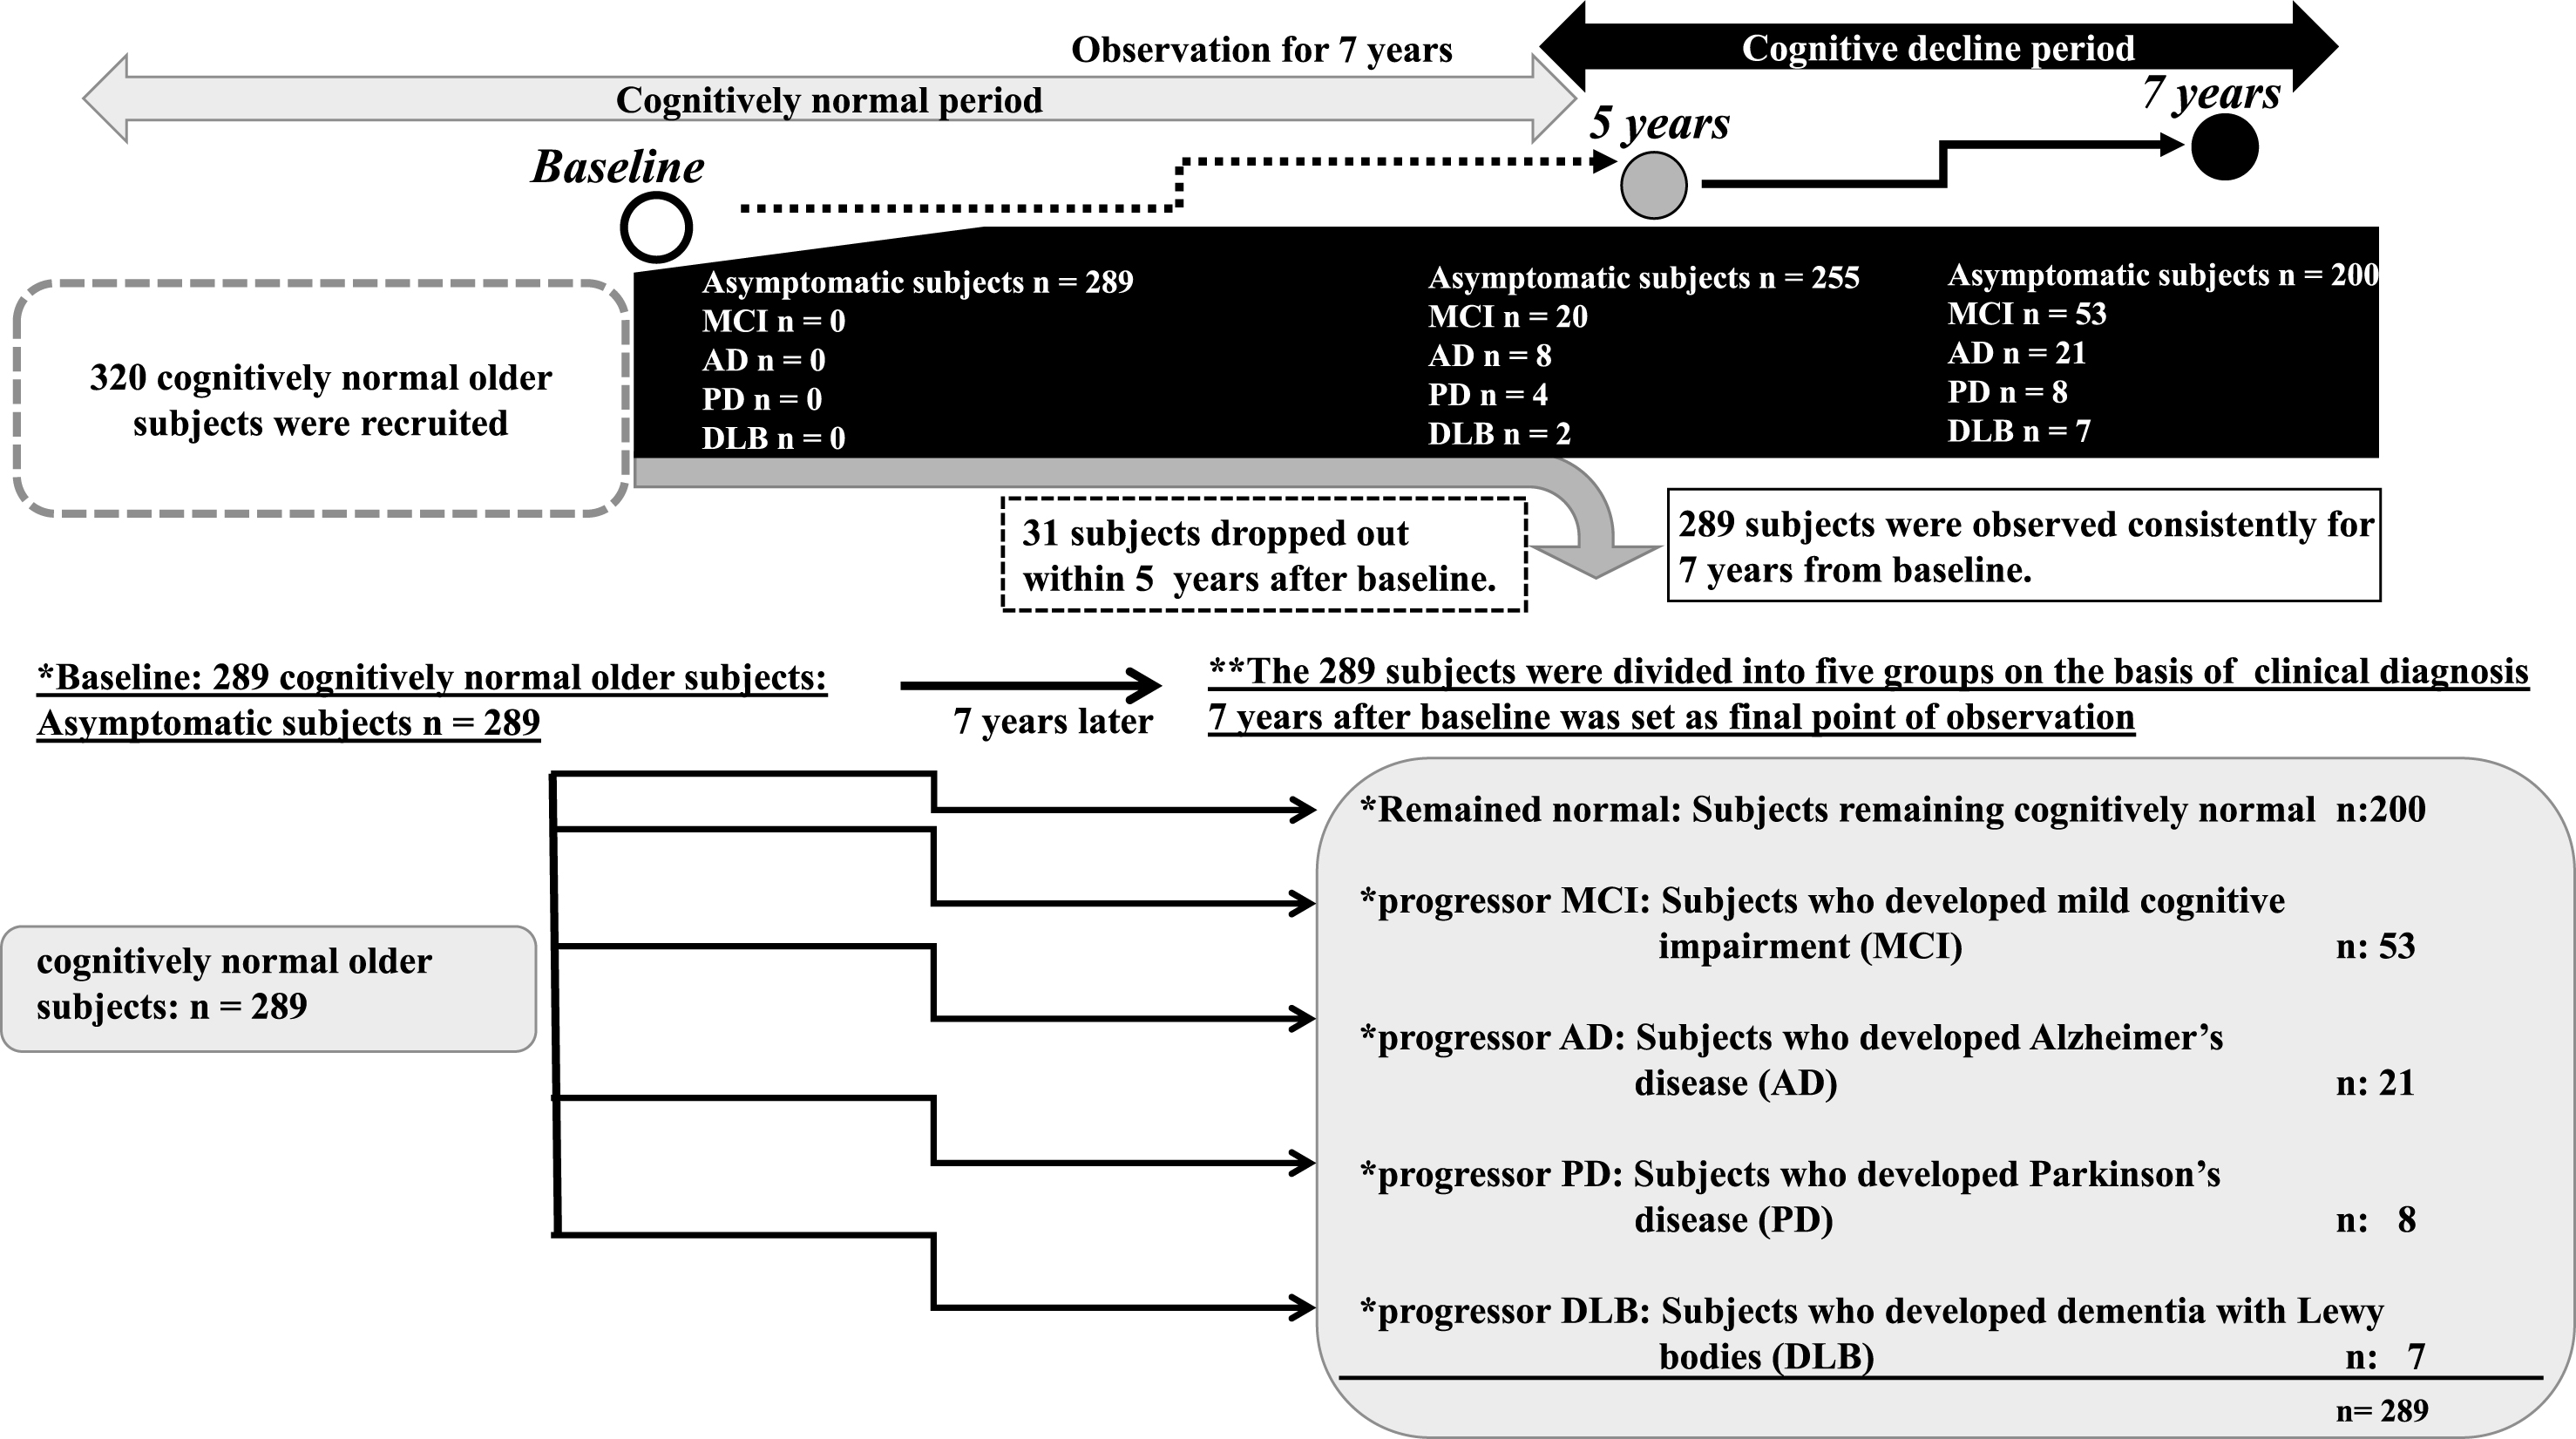 Outline of the follow up study. An outline of this follow up study is shown in a flowchart. We recruited 320 participants who previously voluntarily visited the memory clinic and were deemed cognitively normal without organic brain disorder, ranging from 69 to 89 years old. Informed consent was obtained from all participants. Of these participants, 31 dropped out within 5 years after baseline. Thus, a total of 289 cognitively normal older participants were consistently followed up for 7 years from April 2010 to April 2017. At 7 years after baseline, the 289 participants were divided into the following five groups on the basis of neurological status: *Remained normal: Subjects remaining cognitively normal (n = 200); *Progressor MCI: Subjects who developed MCI 7 years later (n = 53); *Progressor AD: Subjects who developed AD 7 years later (n = 21); *Progressor PD: Subjects who developed PD 7 years later (n = 8); and *Progressor DLB: Subjects who developed DLB 7 years later (n = 7). At 5 years later, there were 20 MCI, eight AD, four PD, and two DLB patients.